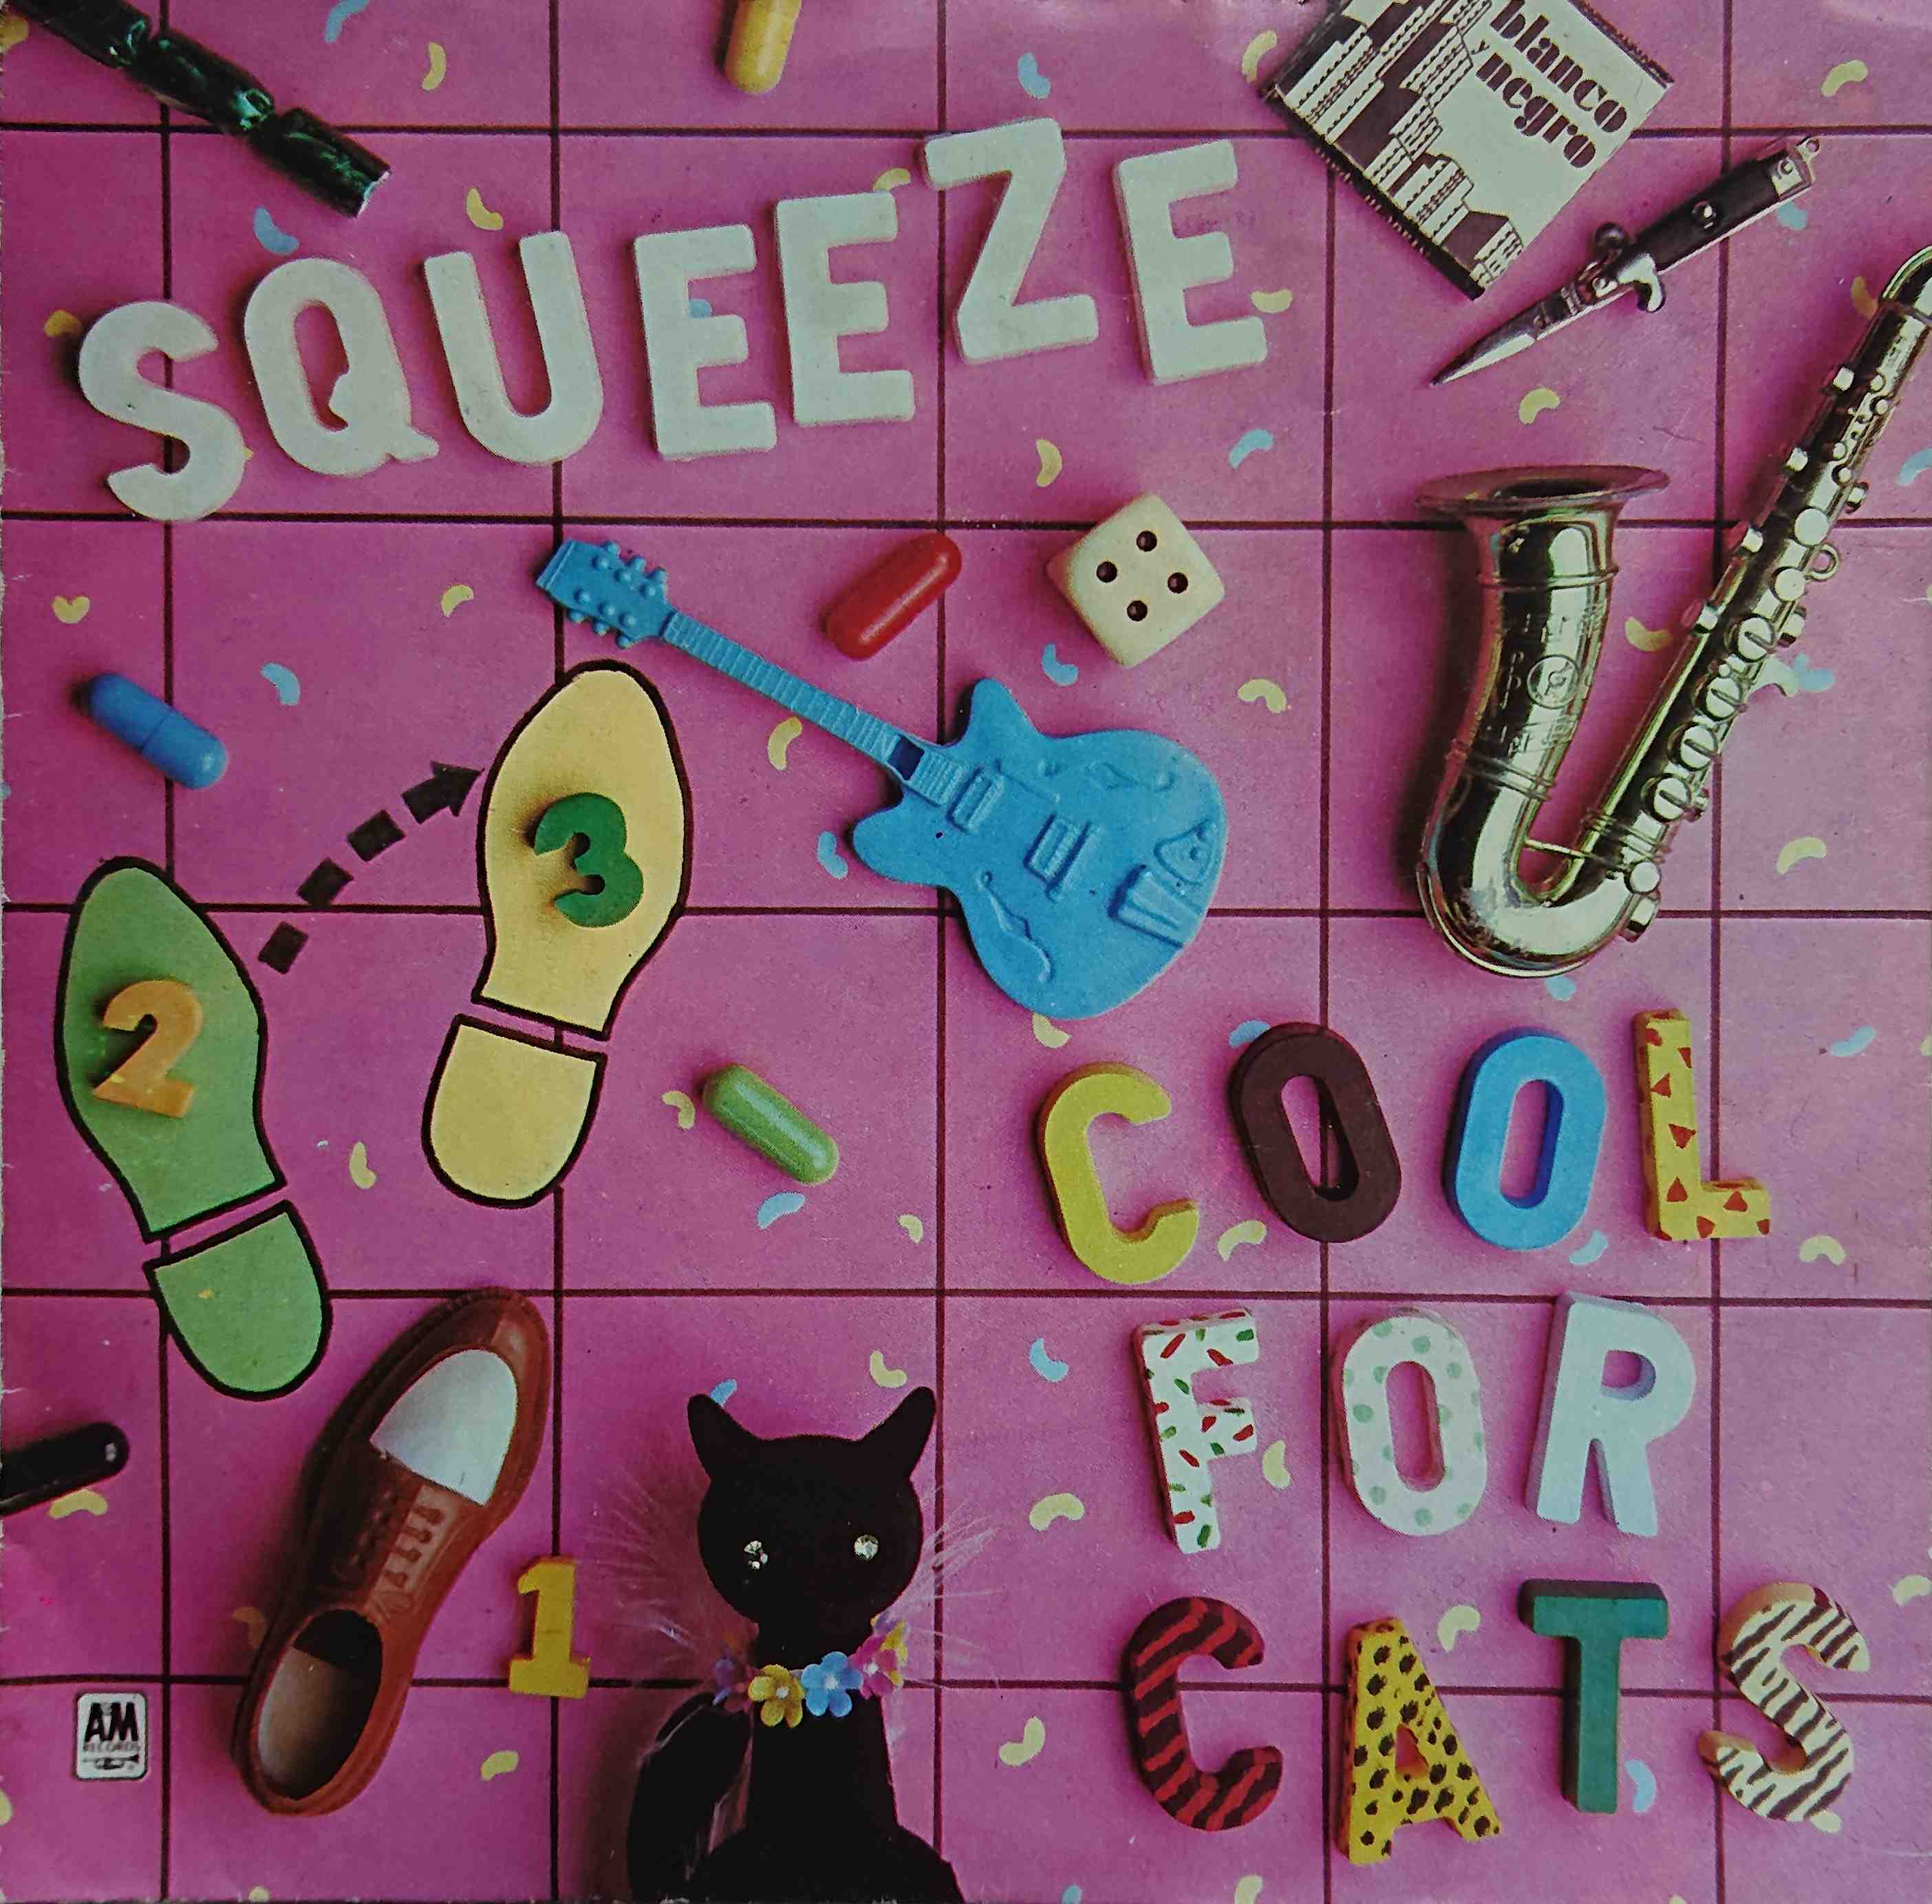 Picture of Cool for cats by artist Squeeze 